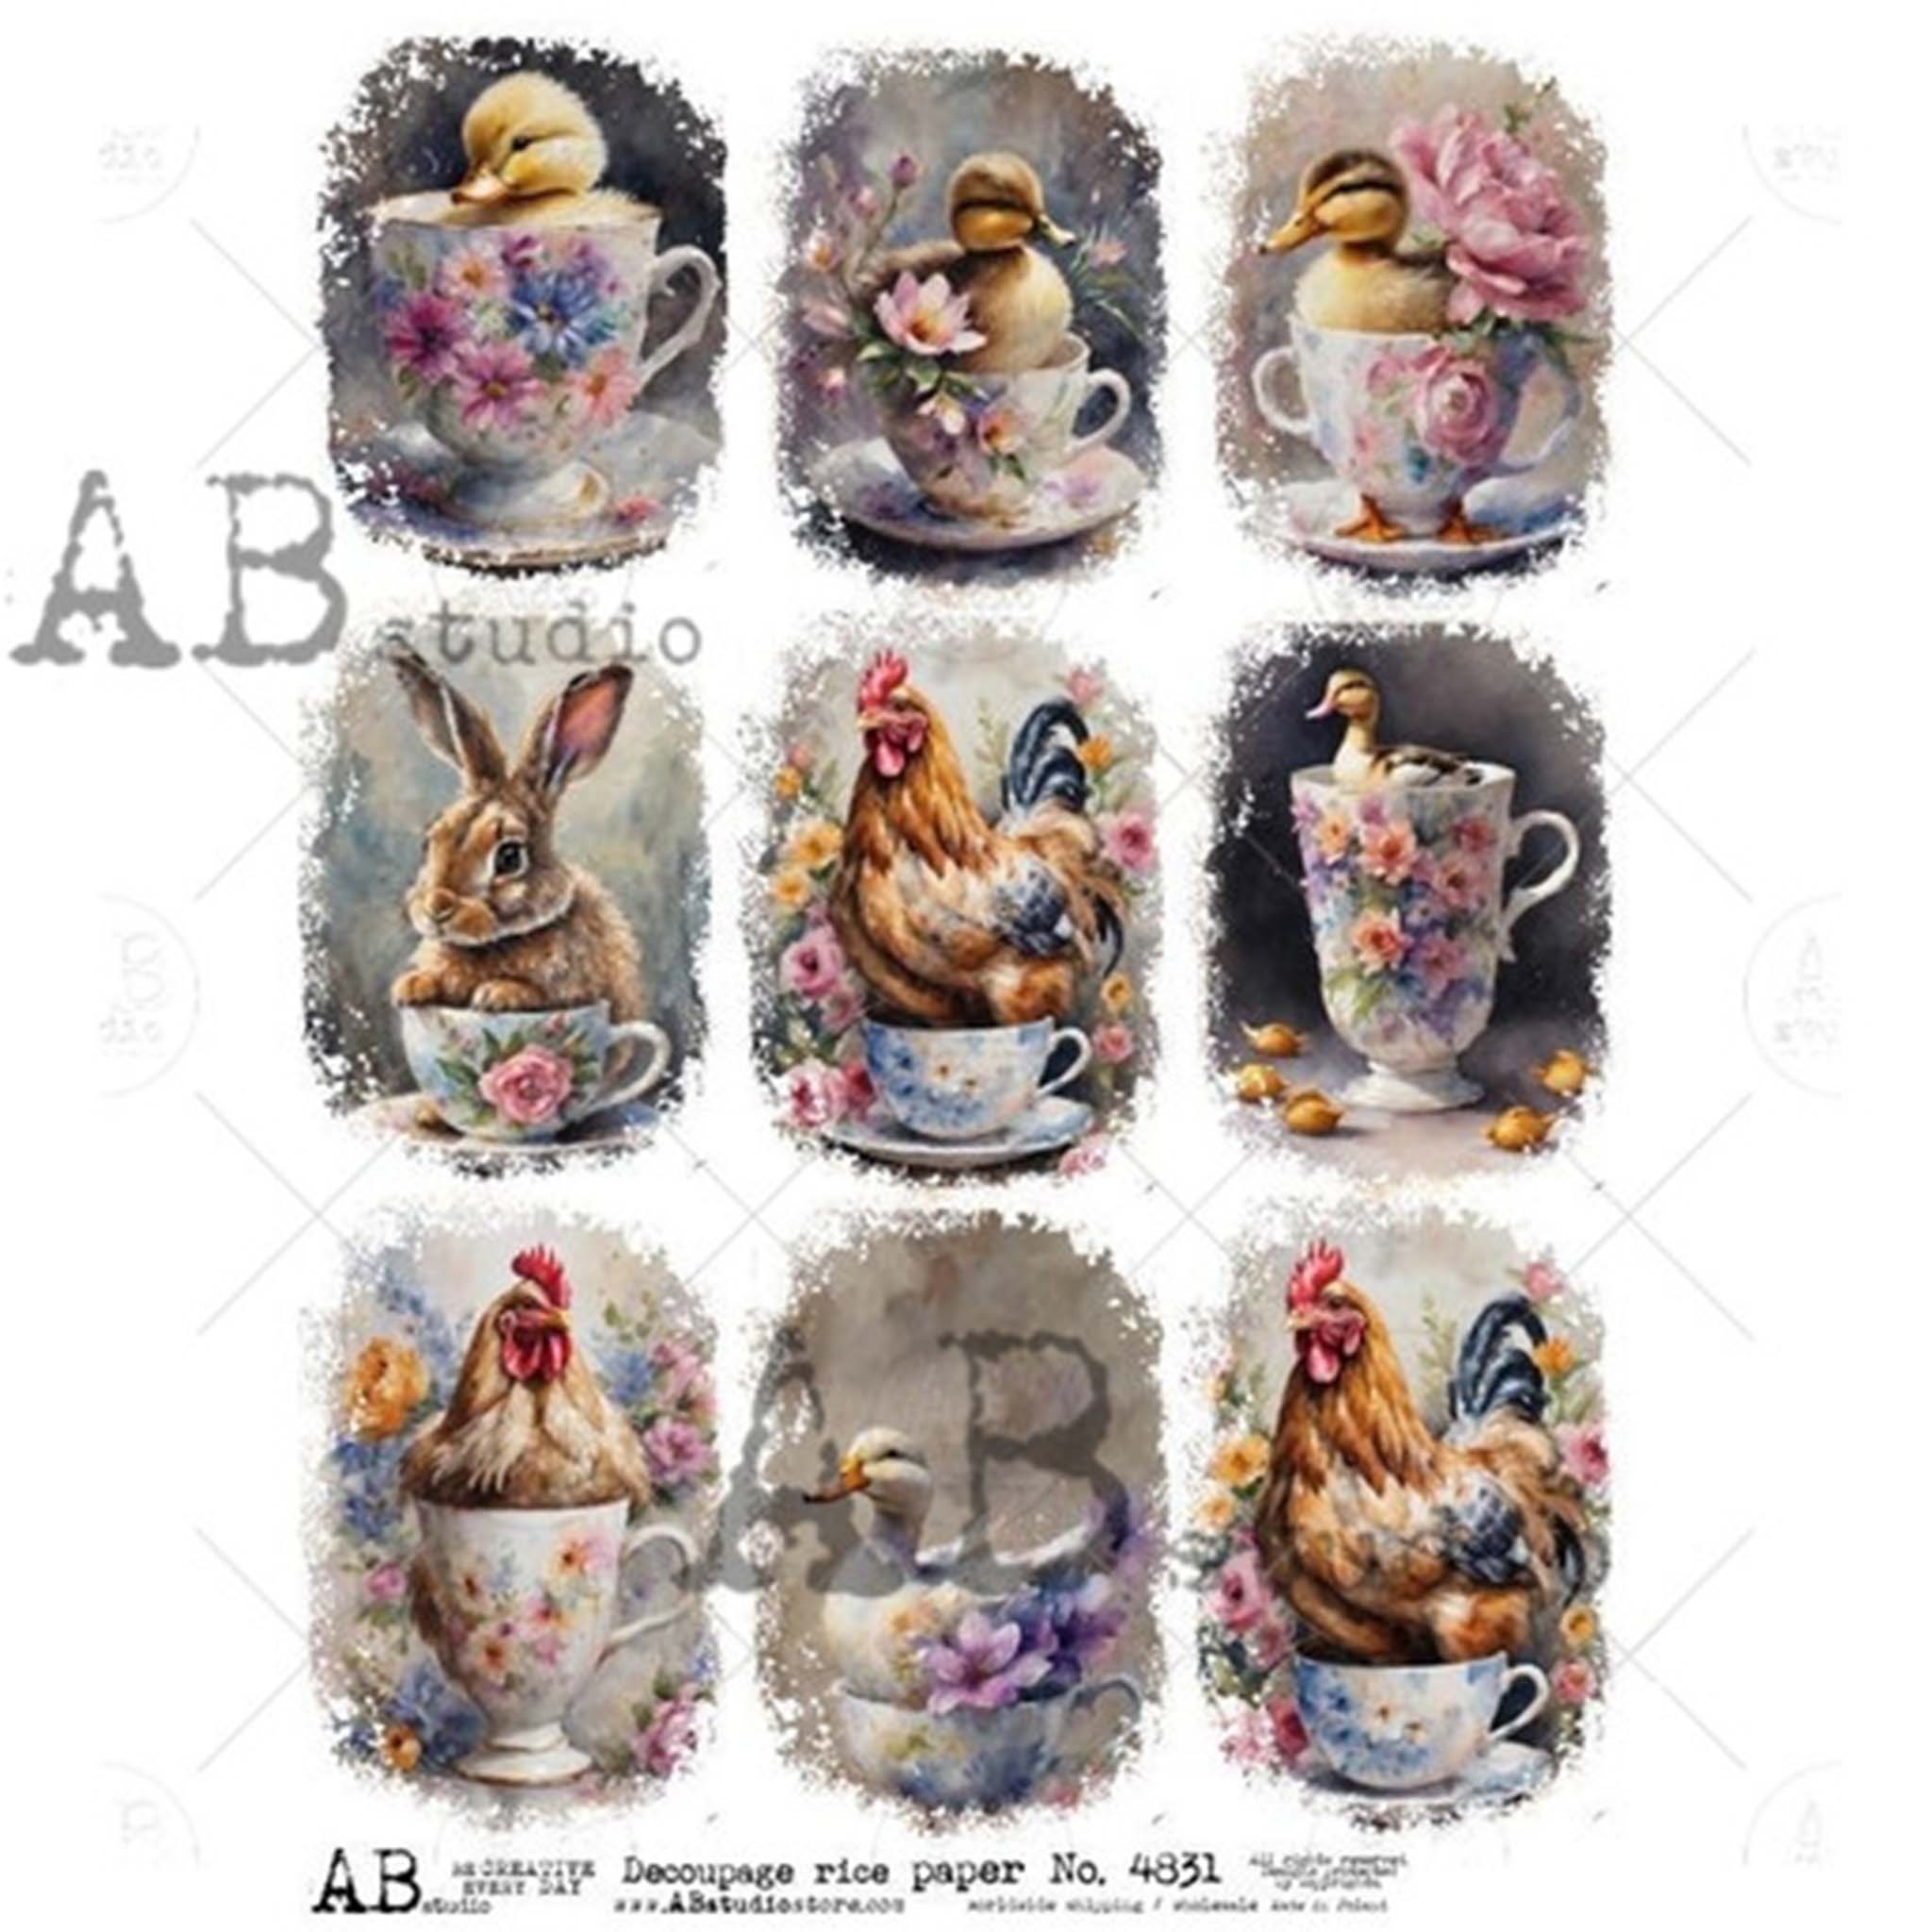 A4 rice paper design that features 9 images of adorable animals sitting in teacups with floral accents are against a white background.